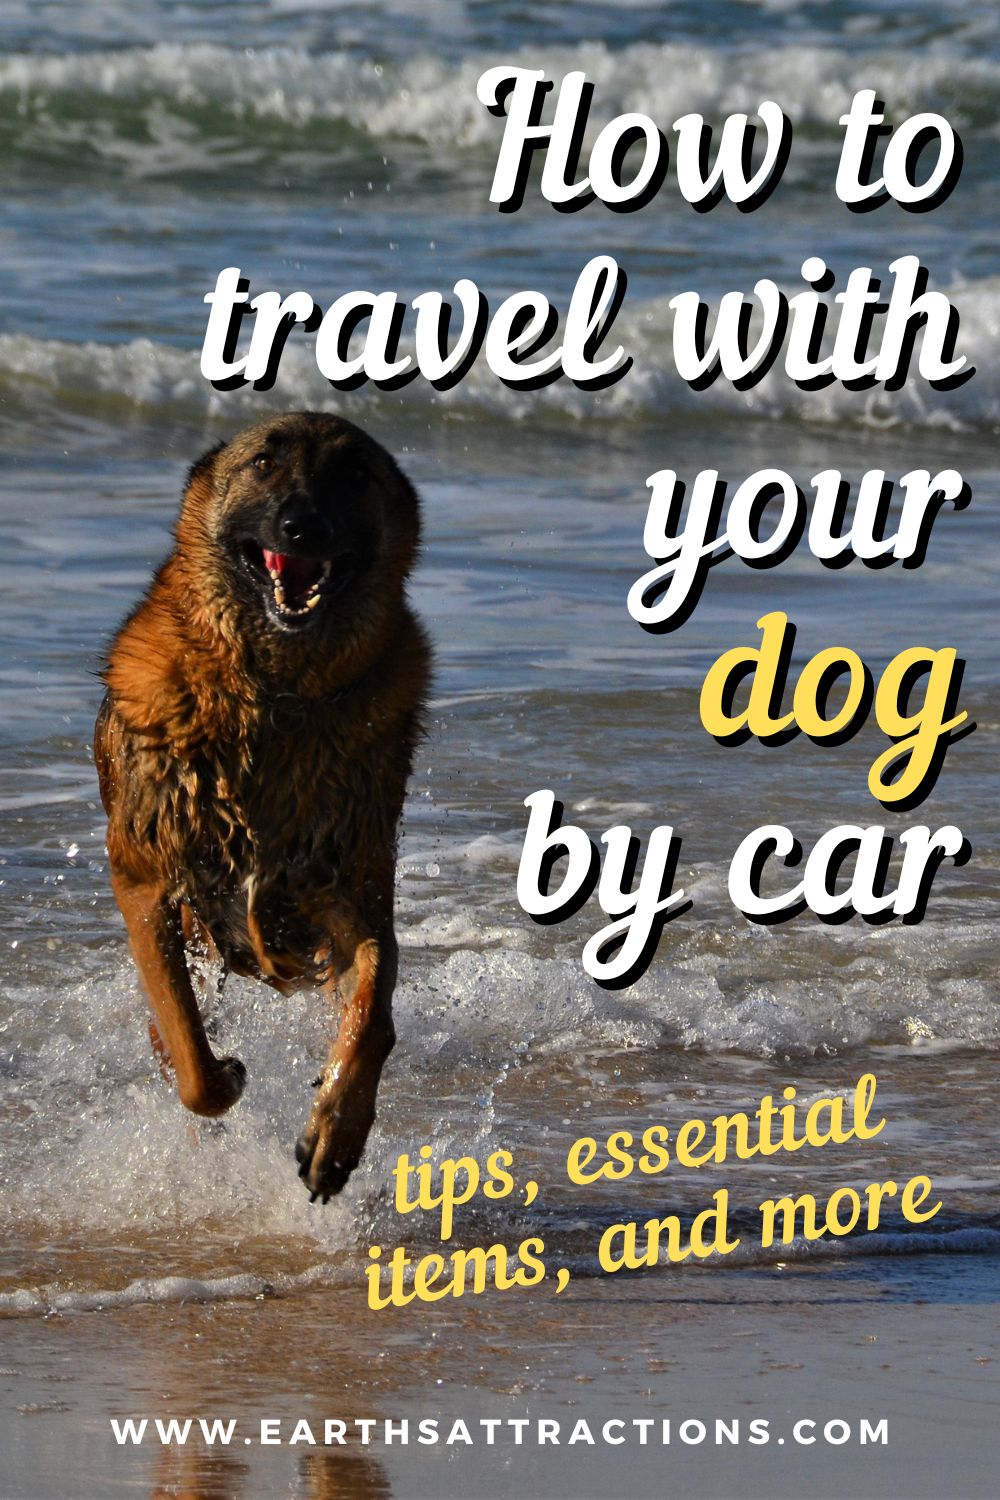 How to travel with your dog by car - I wrote a comprehensive guide to dog travelling by car. Dog travel essentials, tips for traveling with a dog in a car and more. #dogtravel #dogtraveltips #cardogtravel #pettravel #pettraveltips #traveltips